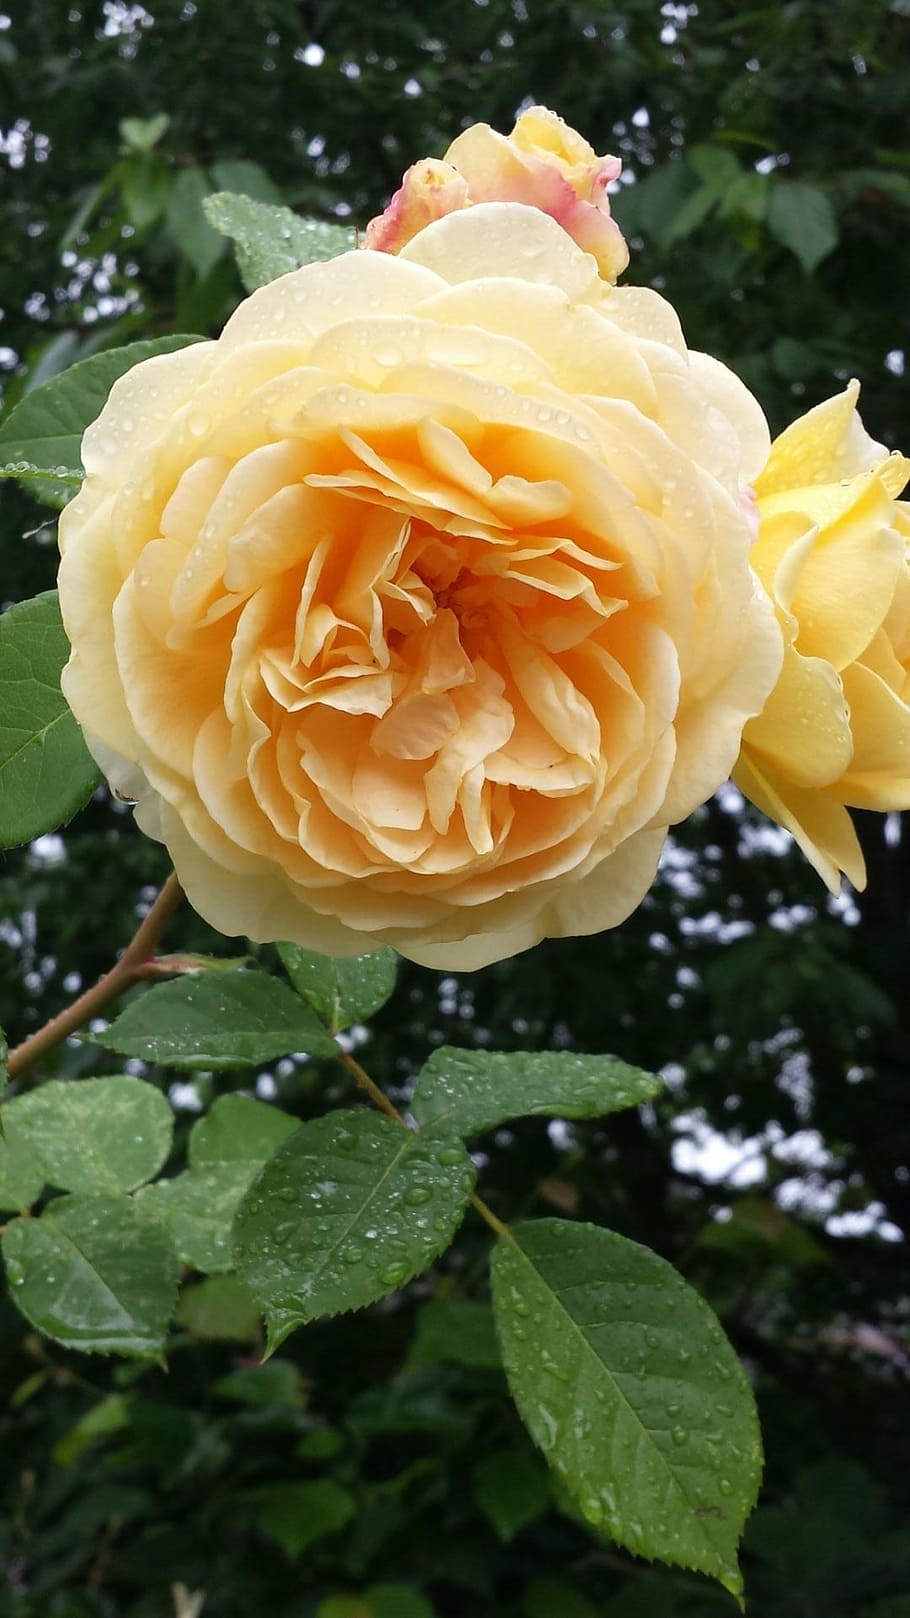 double ruffle rose, yellow rose, blossom, flowers, flora, flower, plant, flowering plant, beauty in nature, petal